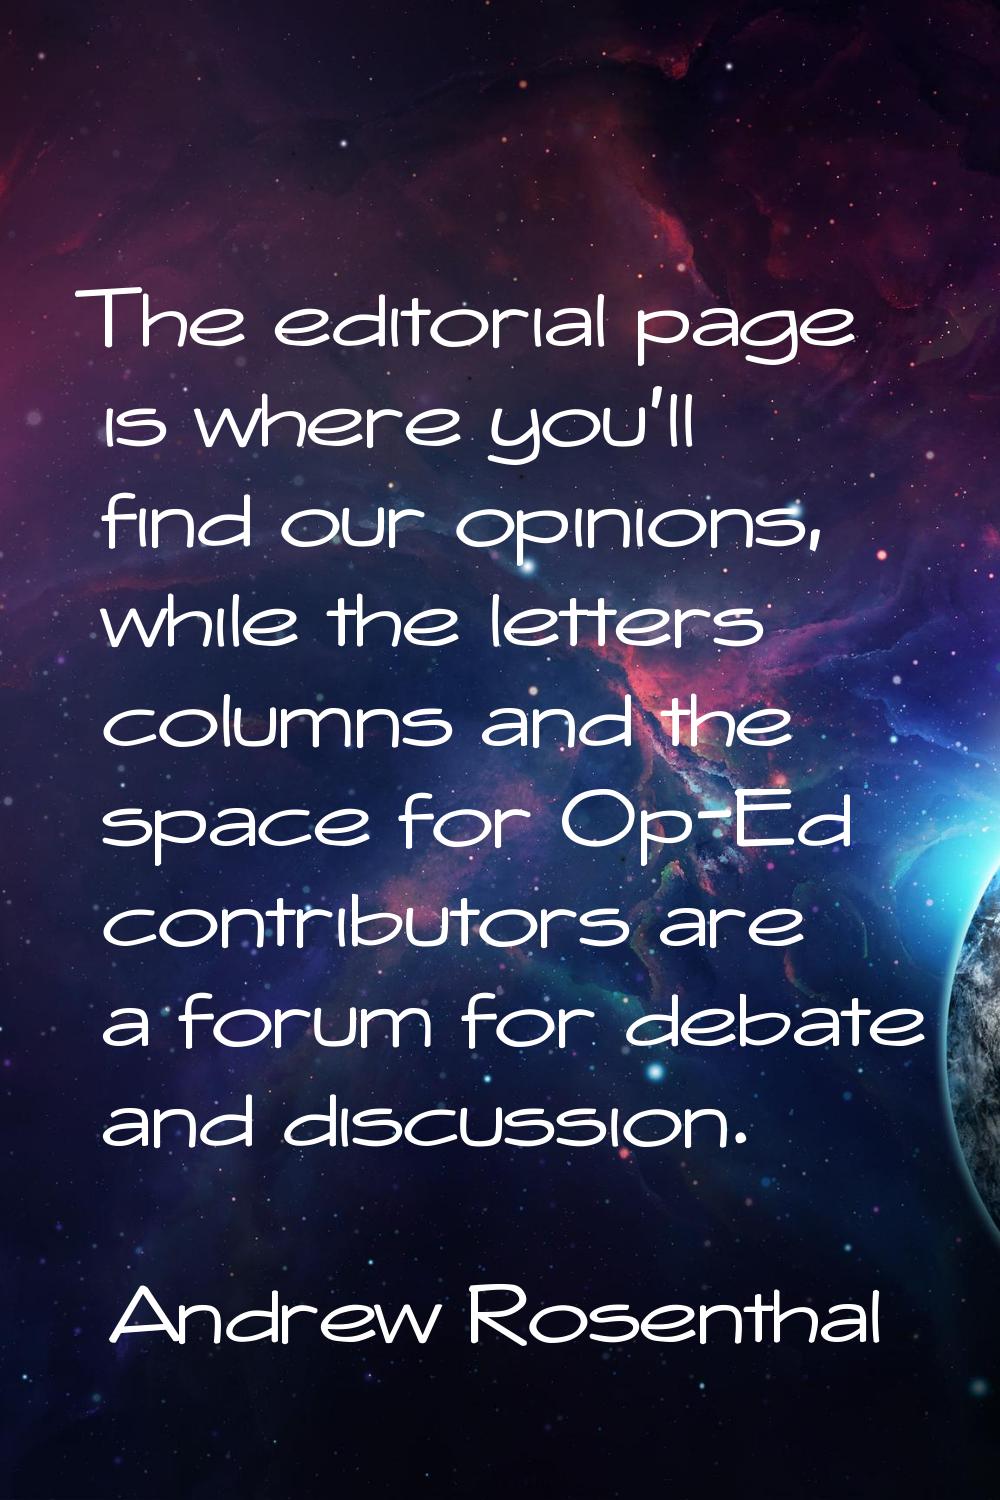 The editorial page is where you'll find our opinions, while the letters columns and the space for O